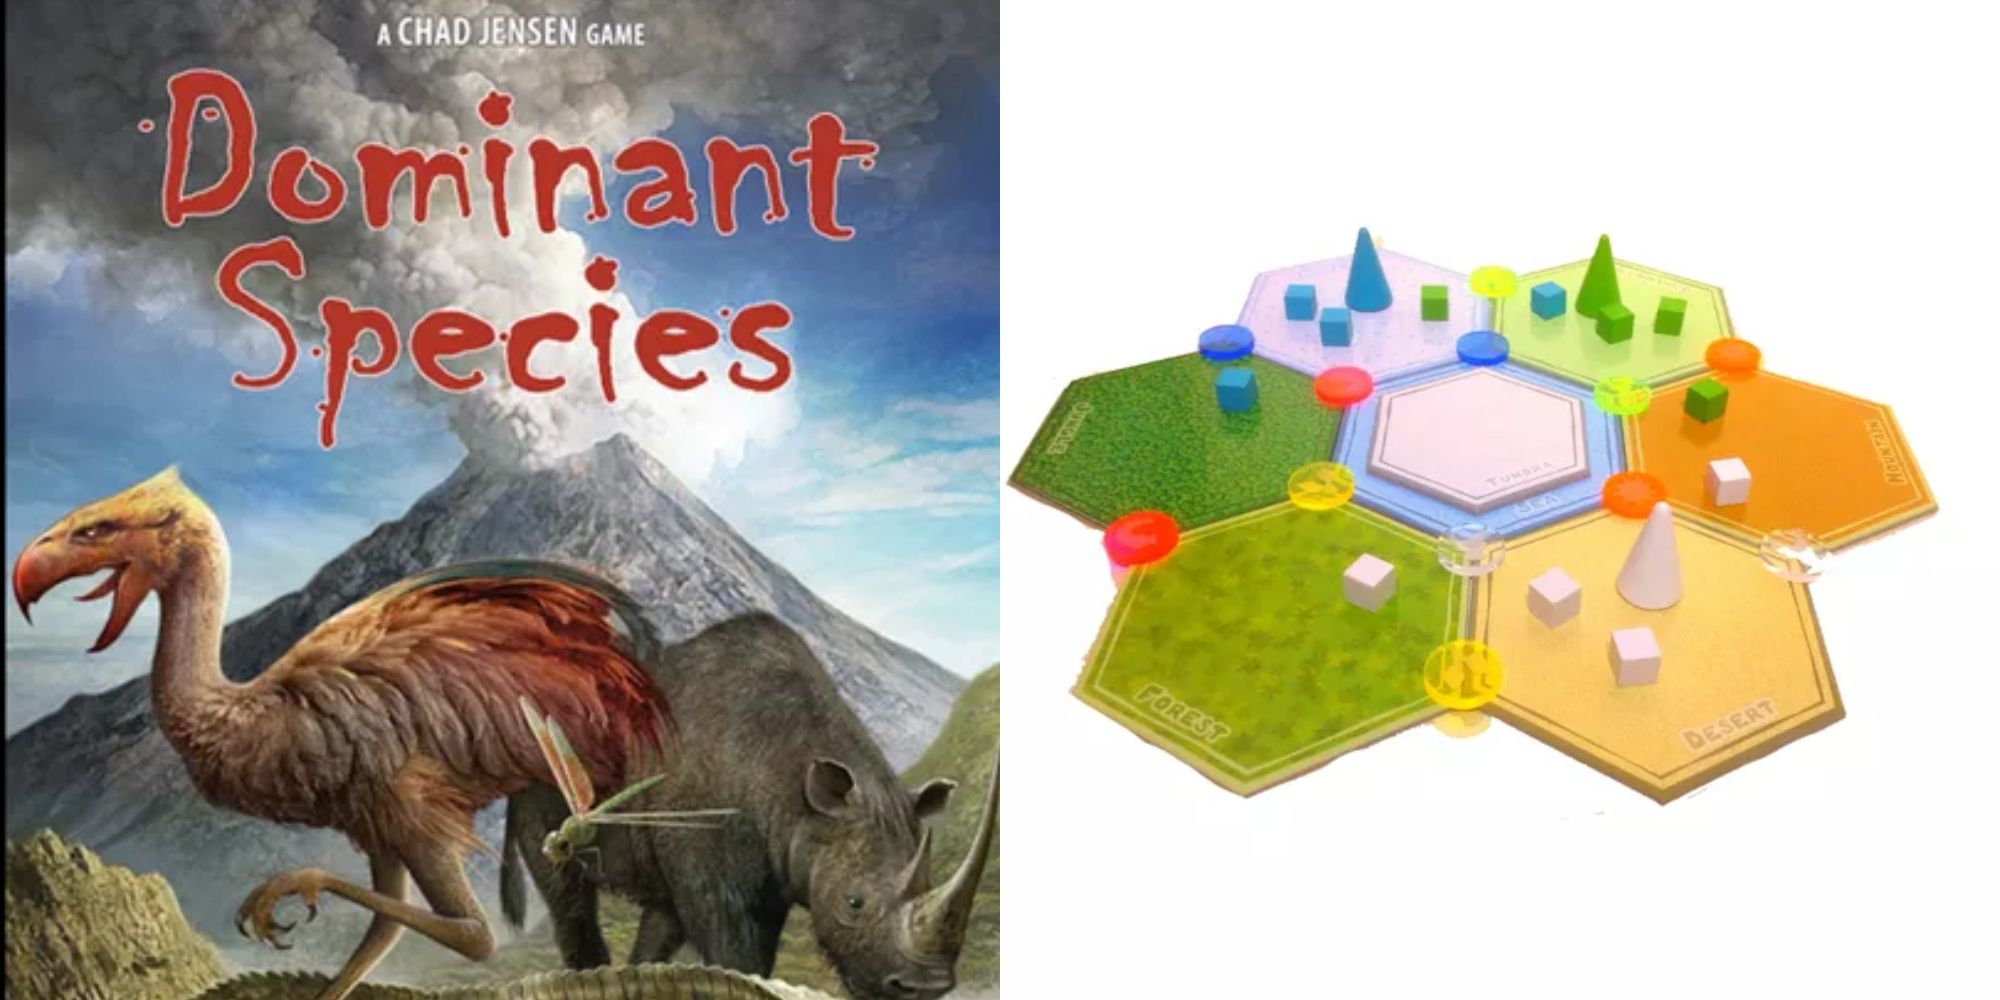 Dominant Species board game cover and piece set up